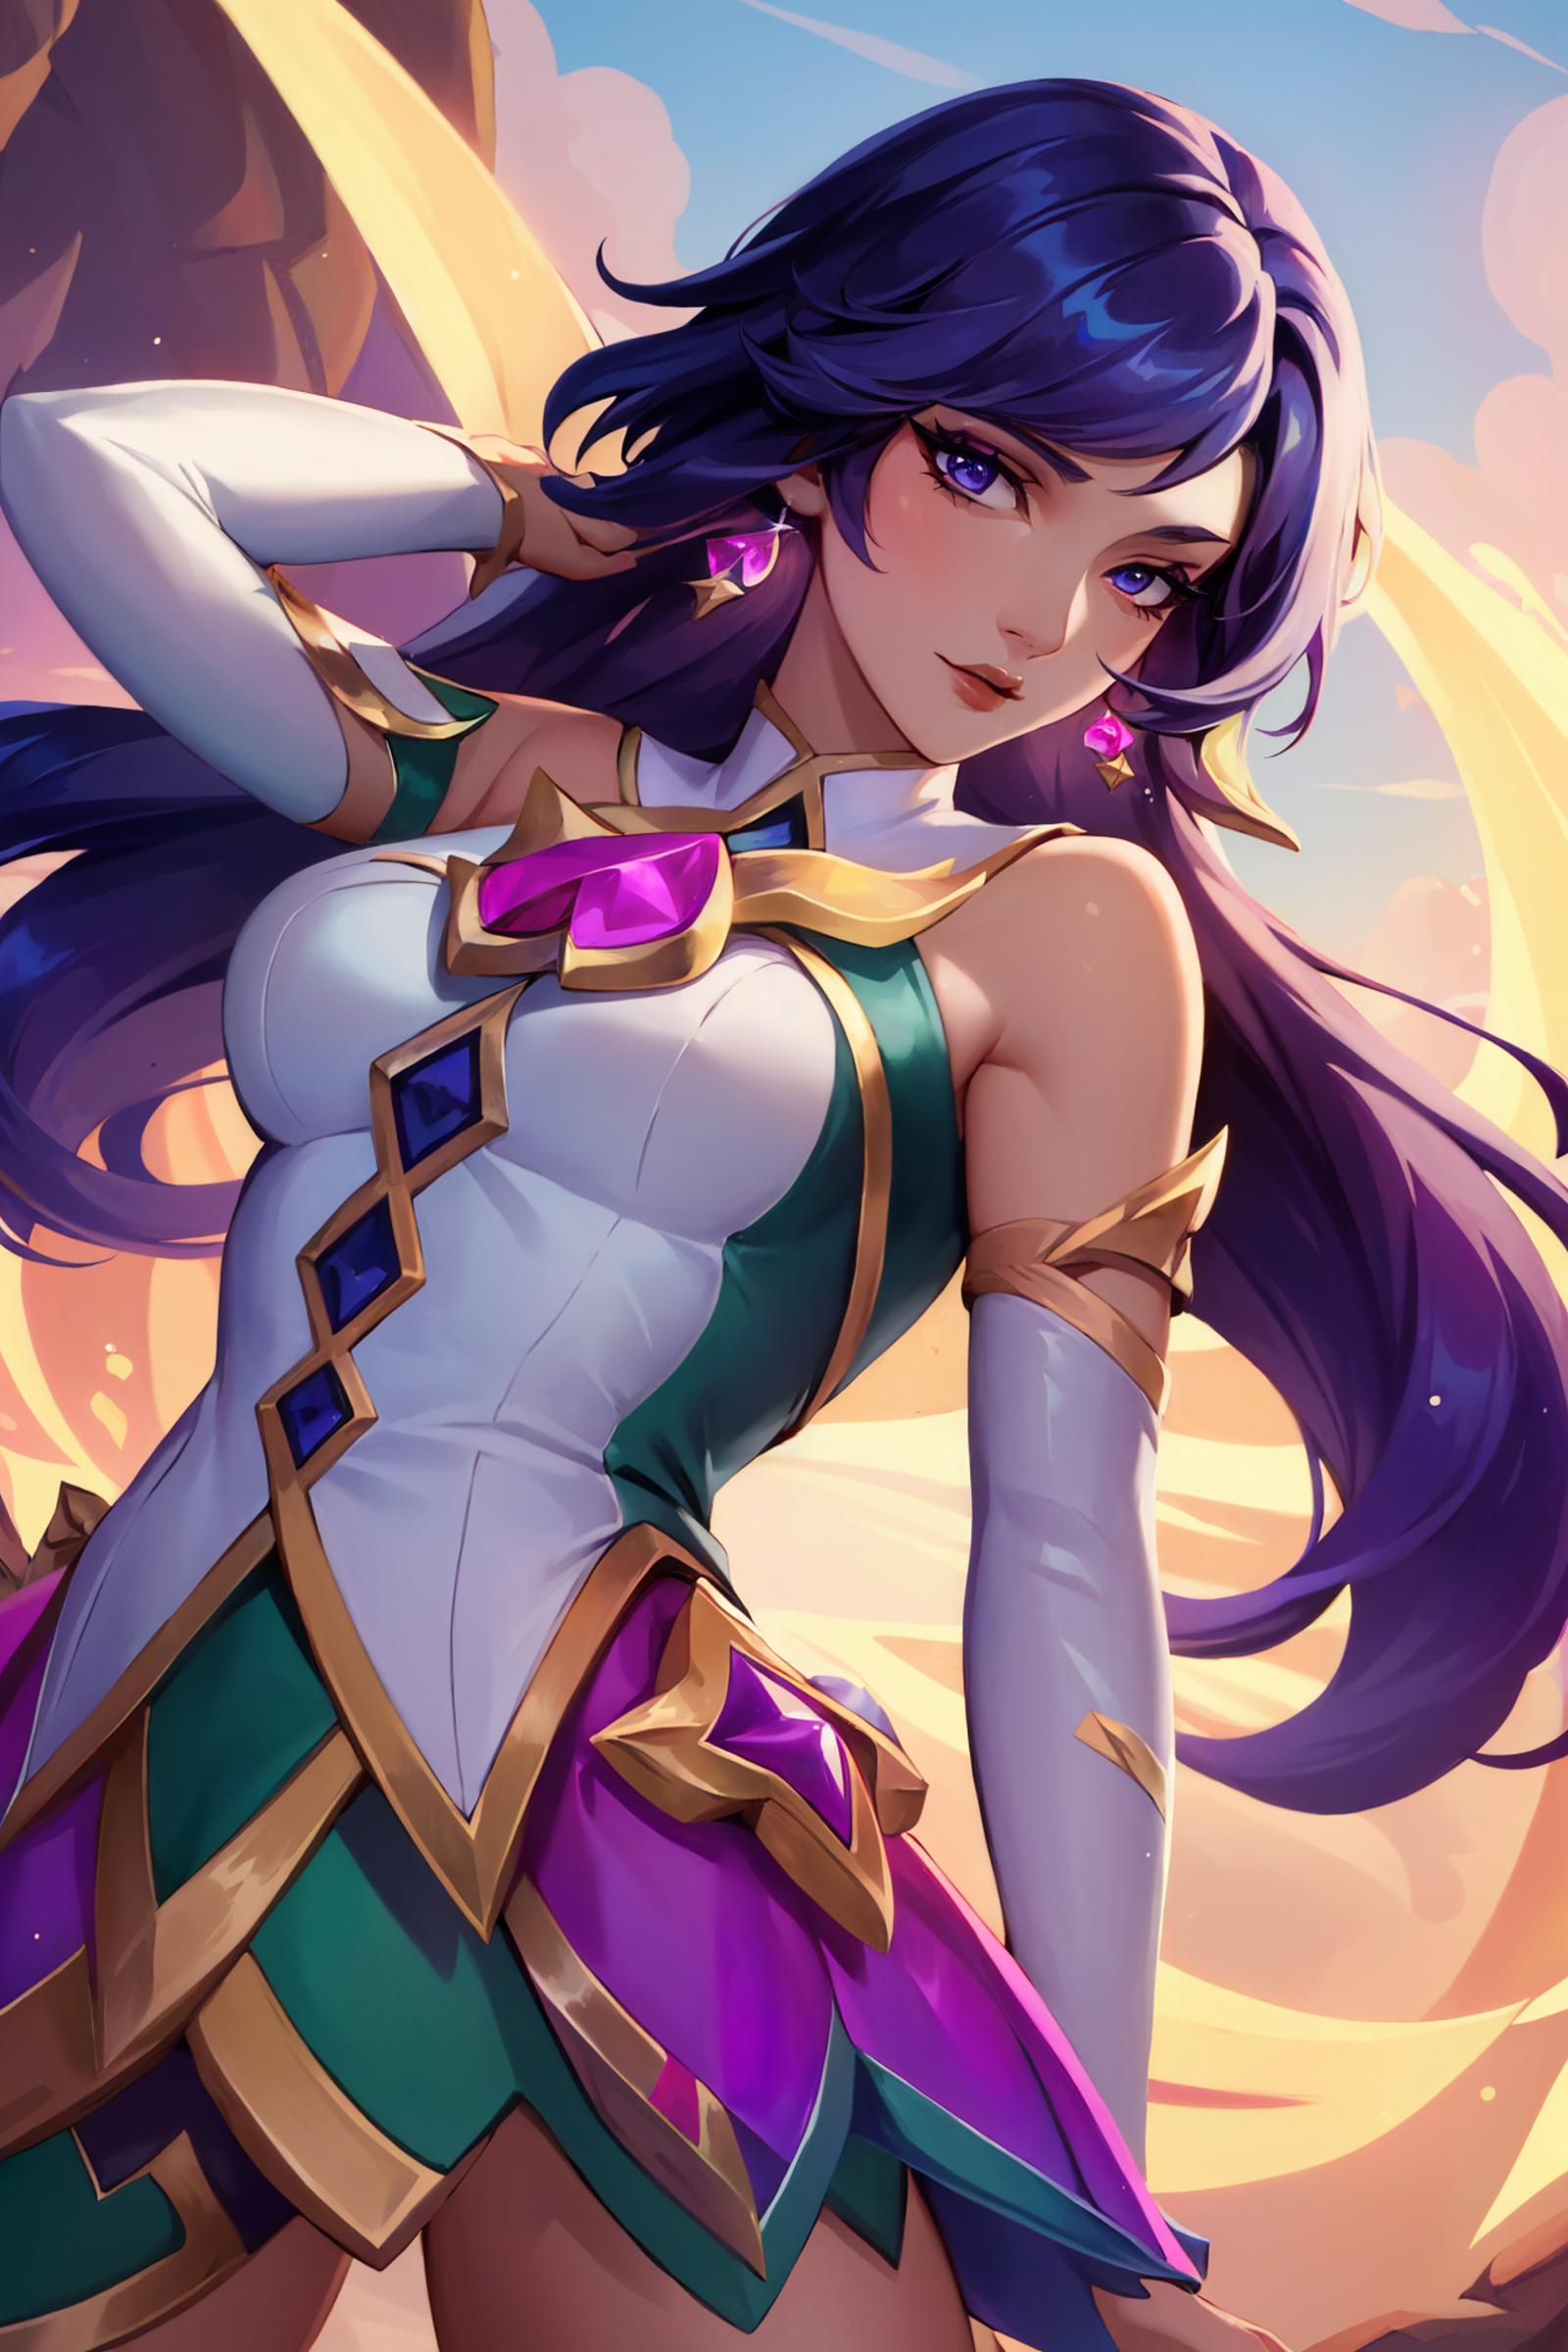 Nilah + Star Guardian | League of Legends image by AhriMain